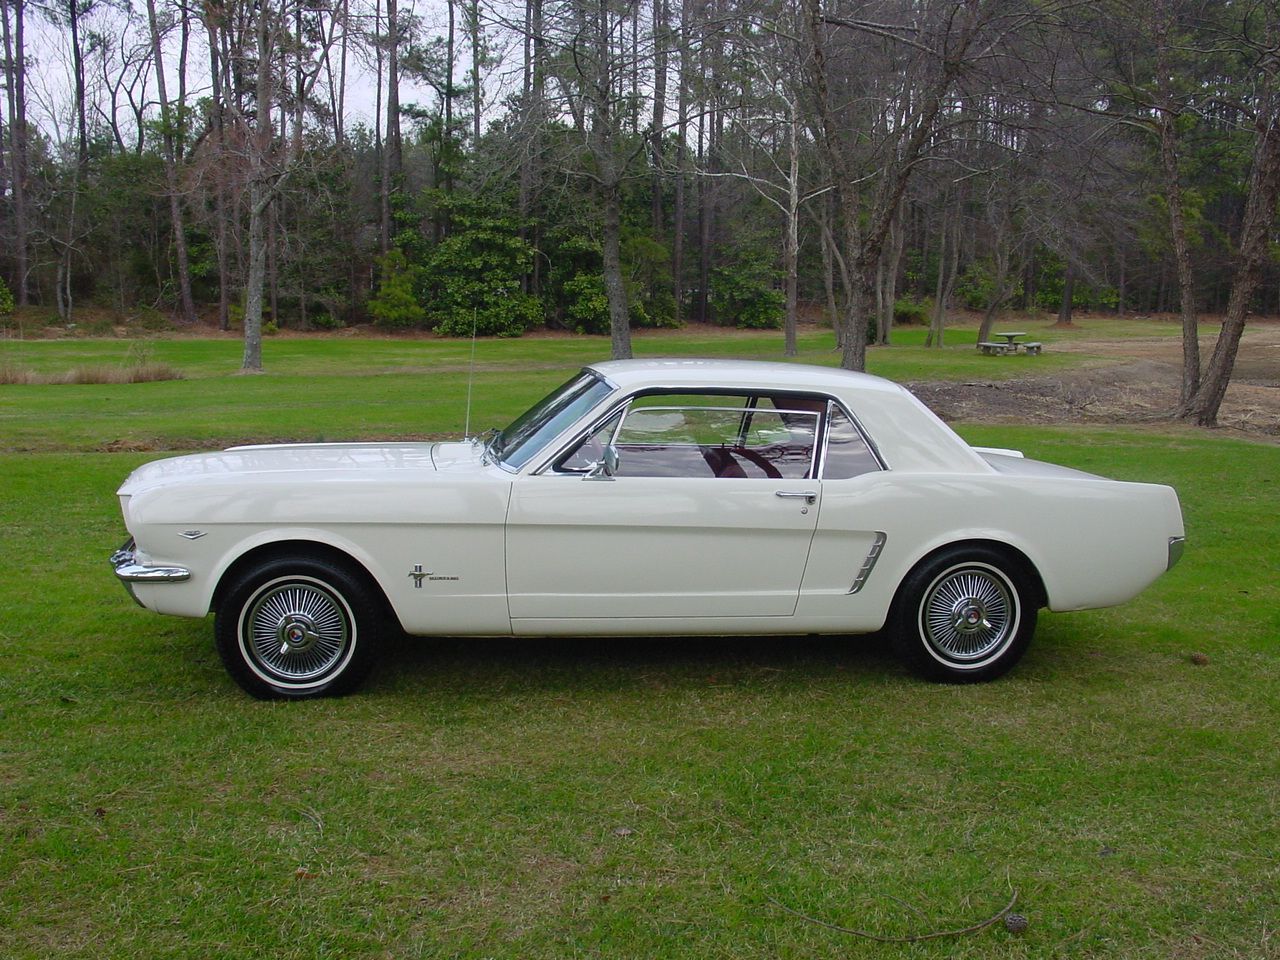 White Mustang from the side in a grassy field